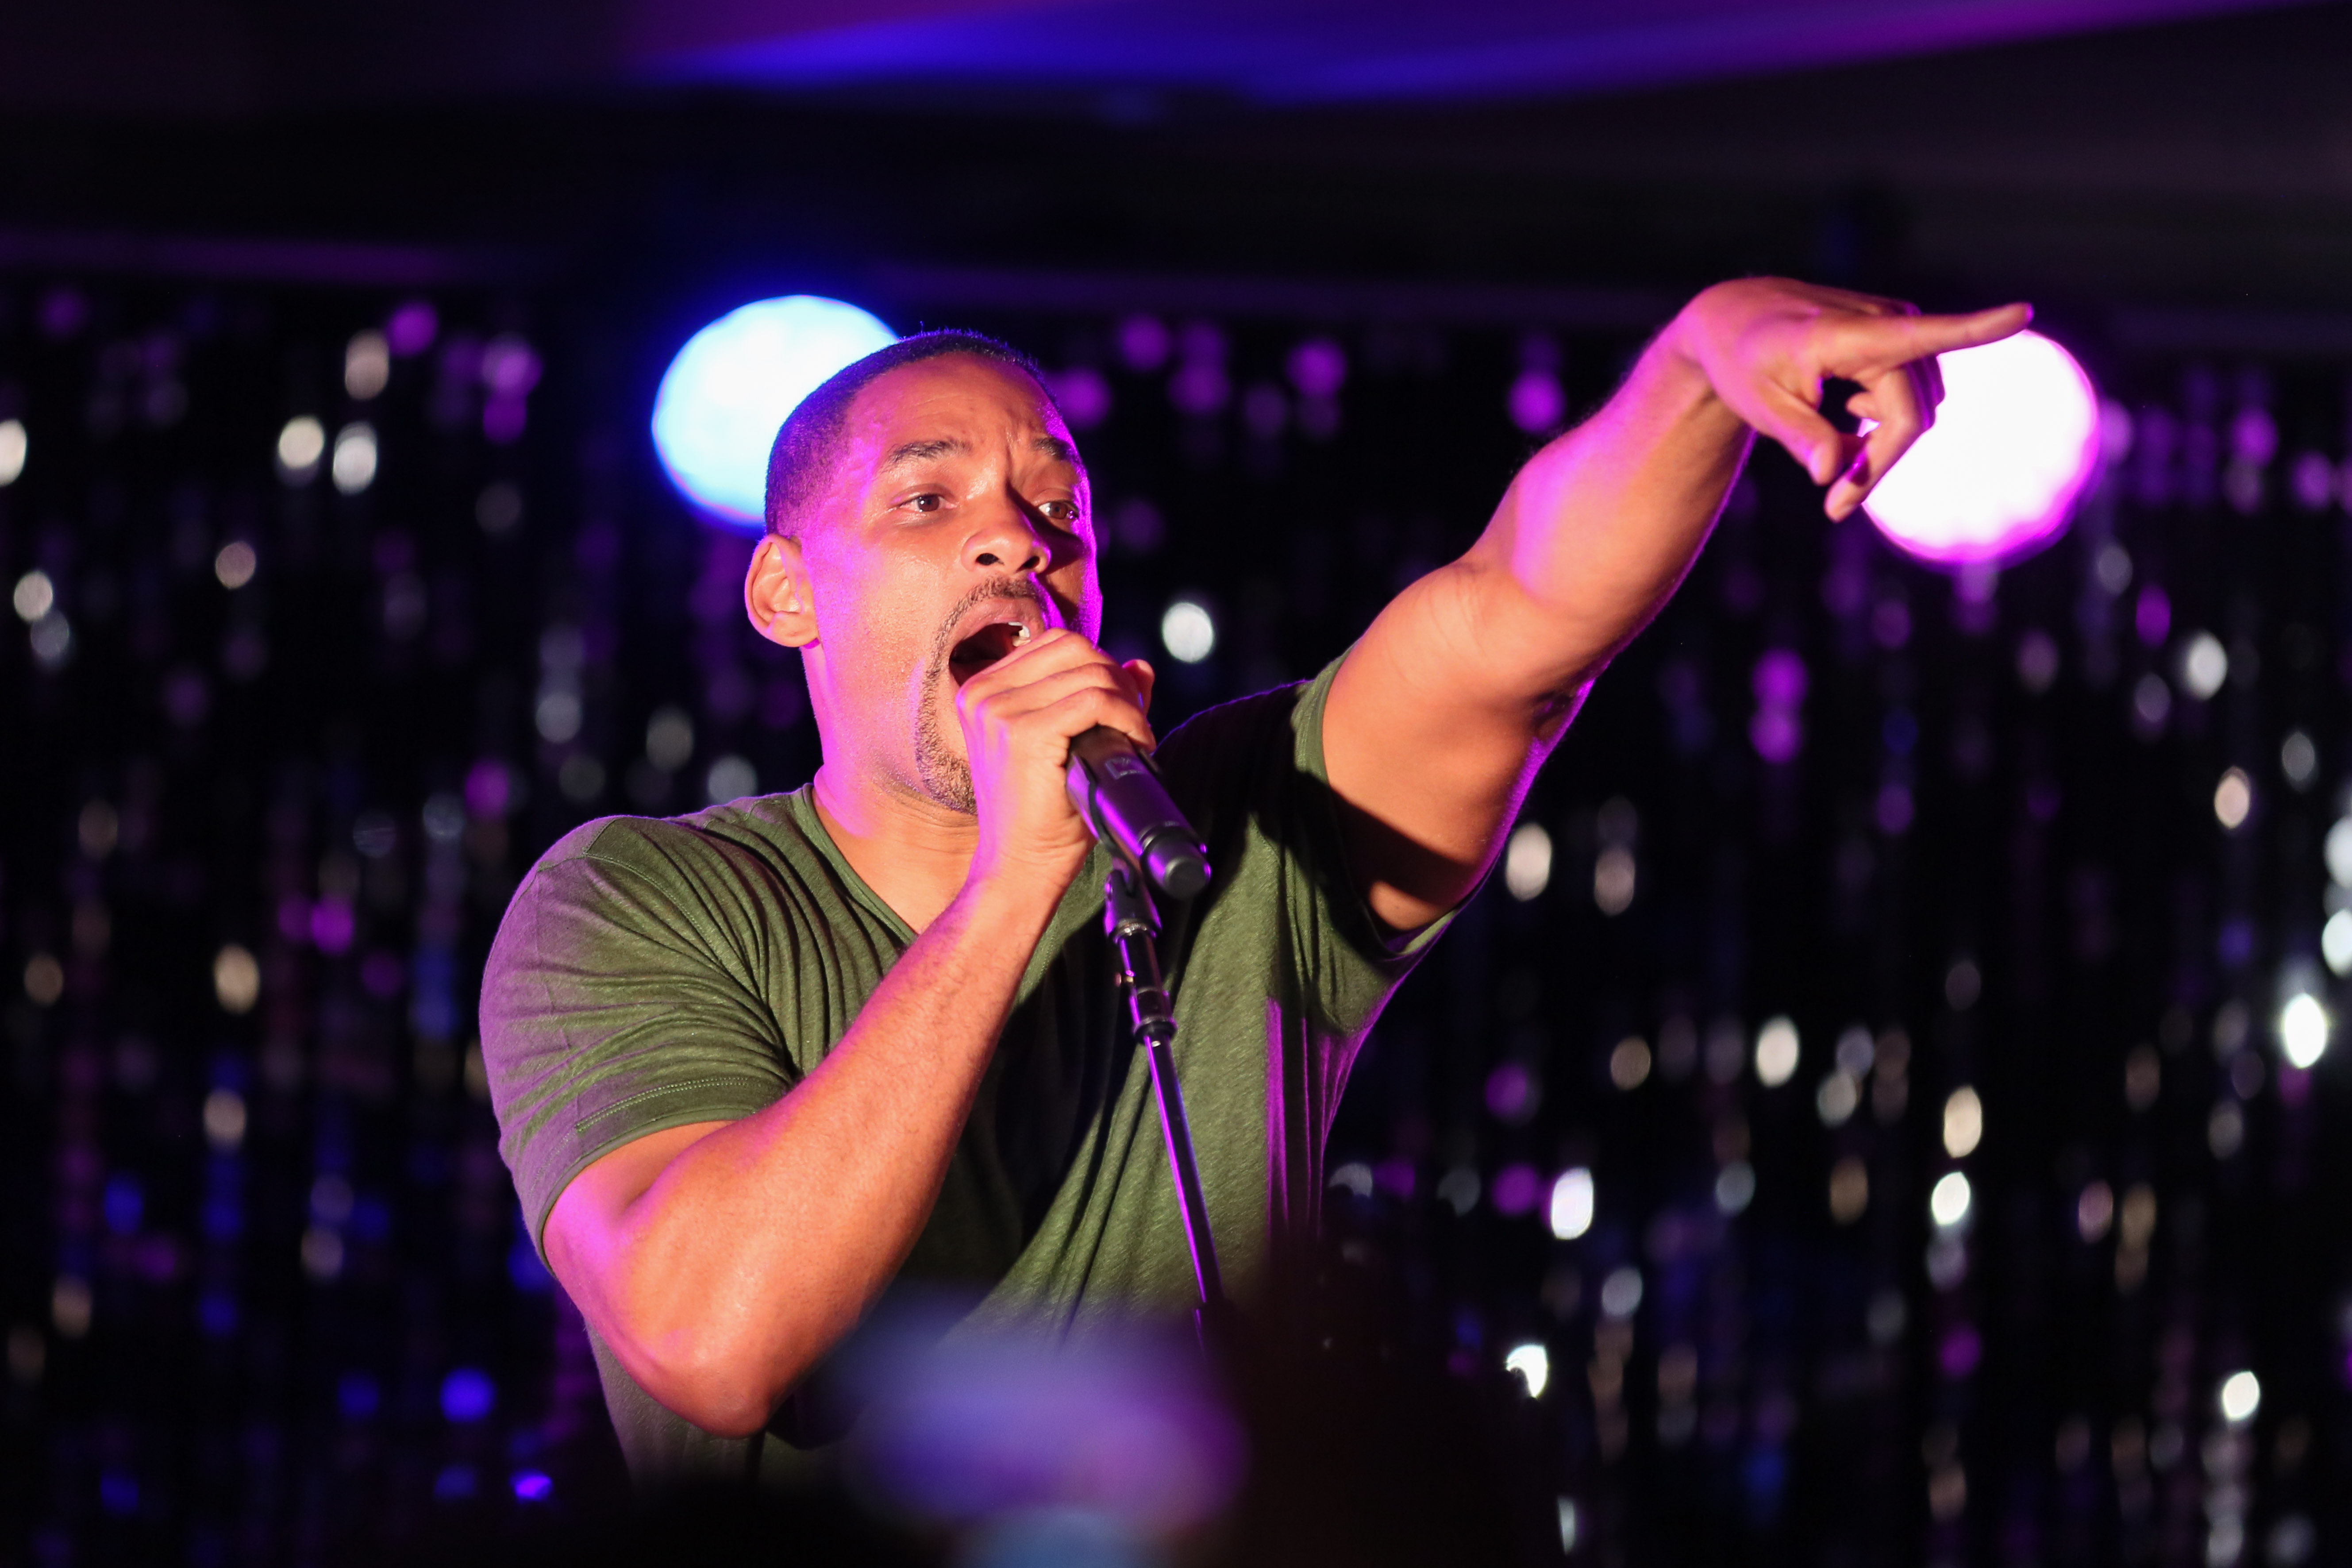 Chris Martin Of Coldplay Performs At A Dinner Party Hosted By iHeartMedia And MediaLink During The Cannes Lions Festival Of Creativity